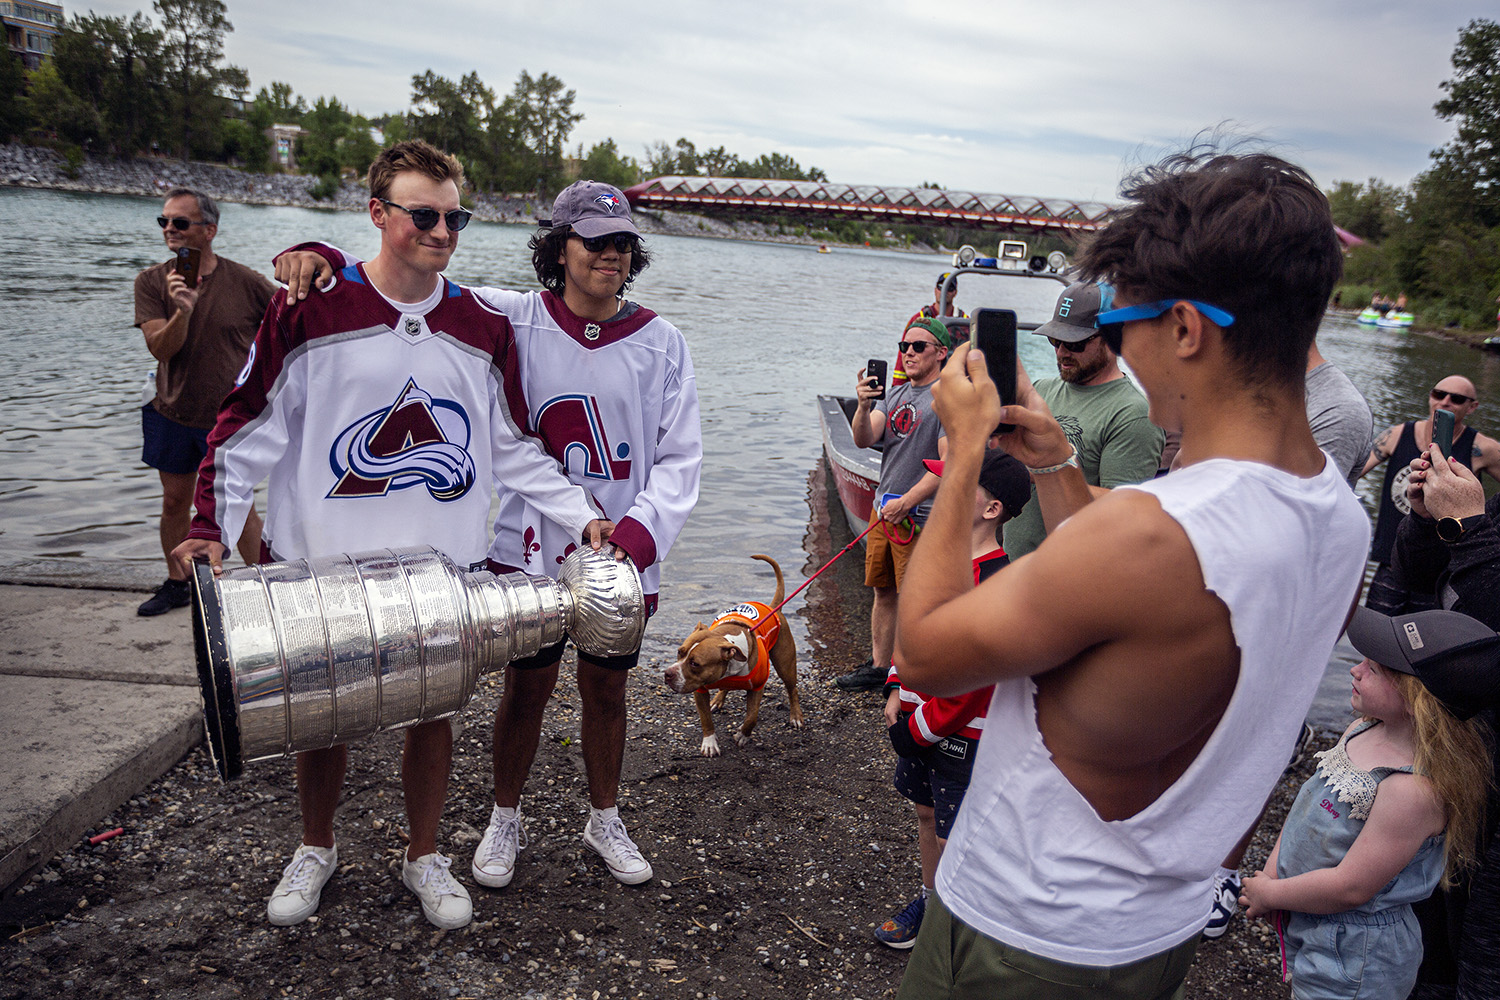 Cale Makar hosts Stanley Cup meet-and-greet at Crowchild Twin Arena